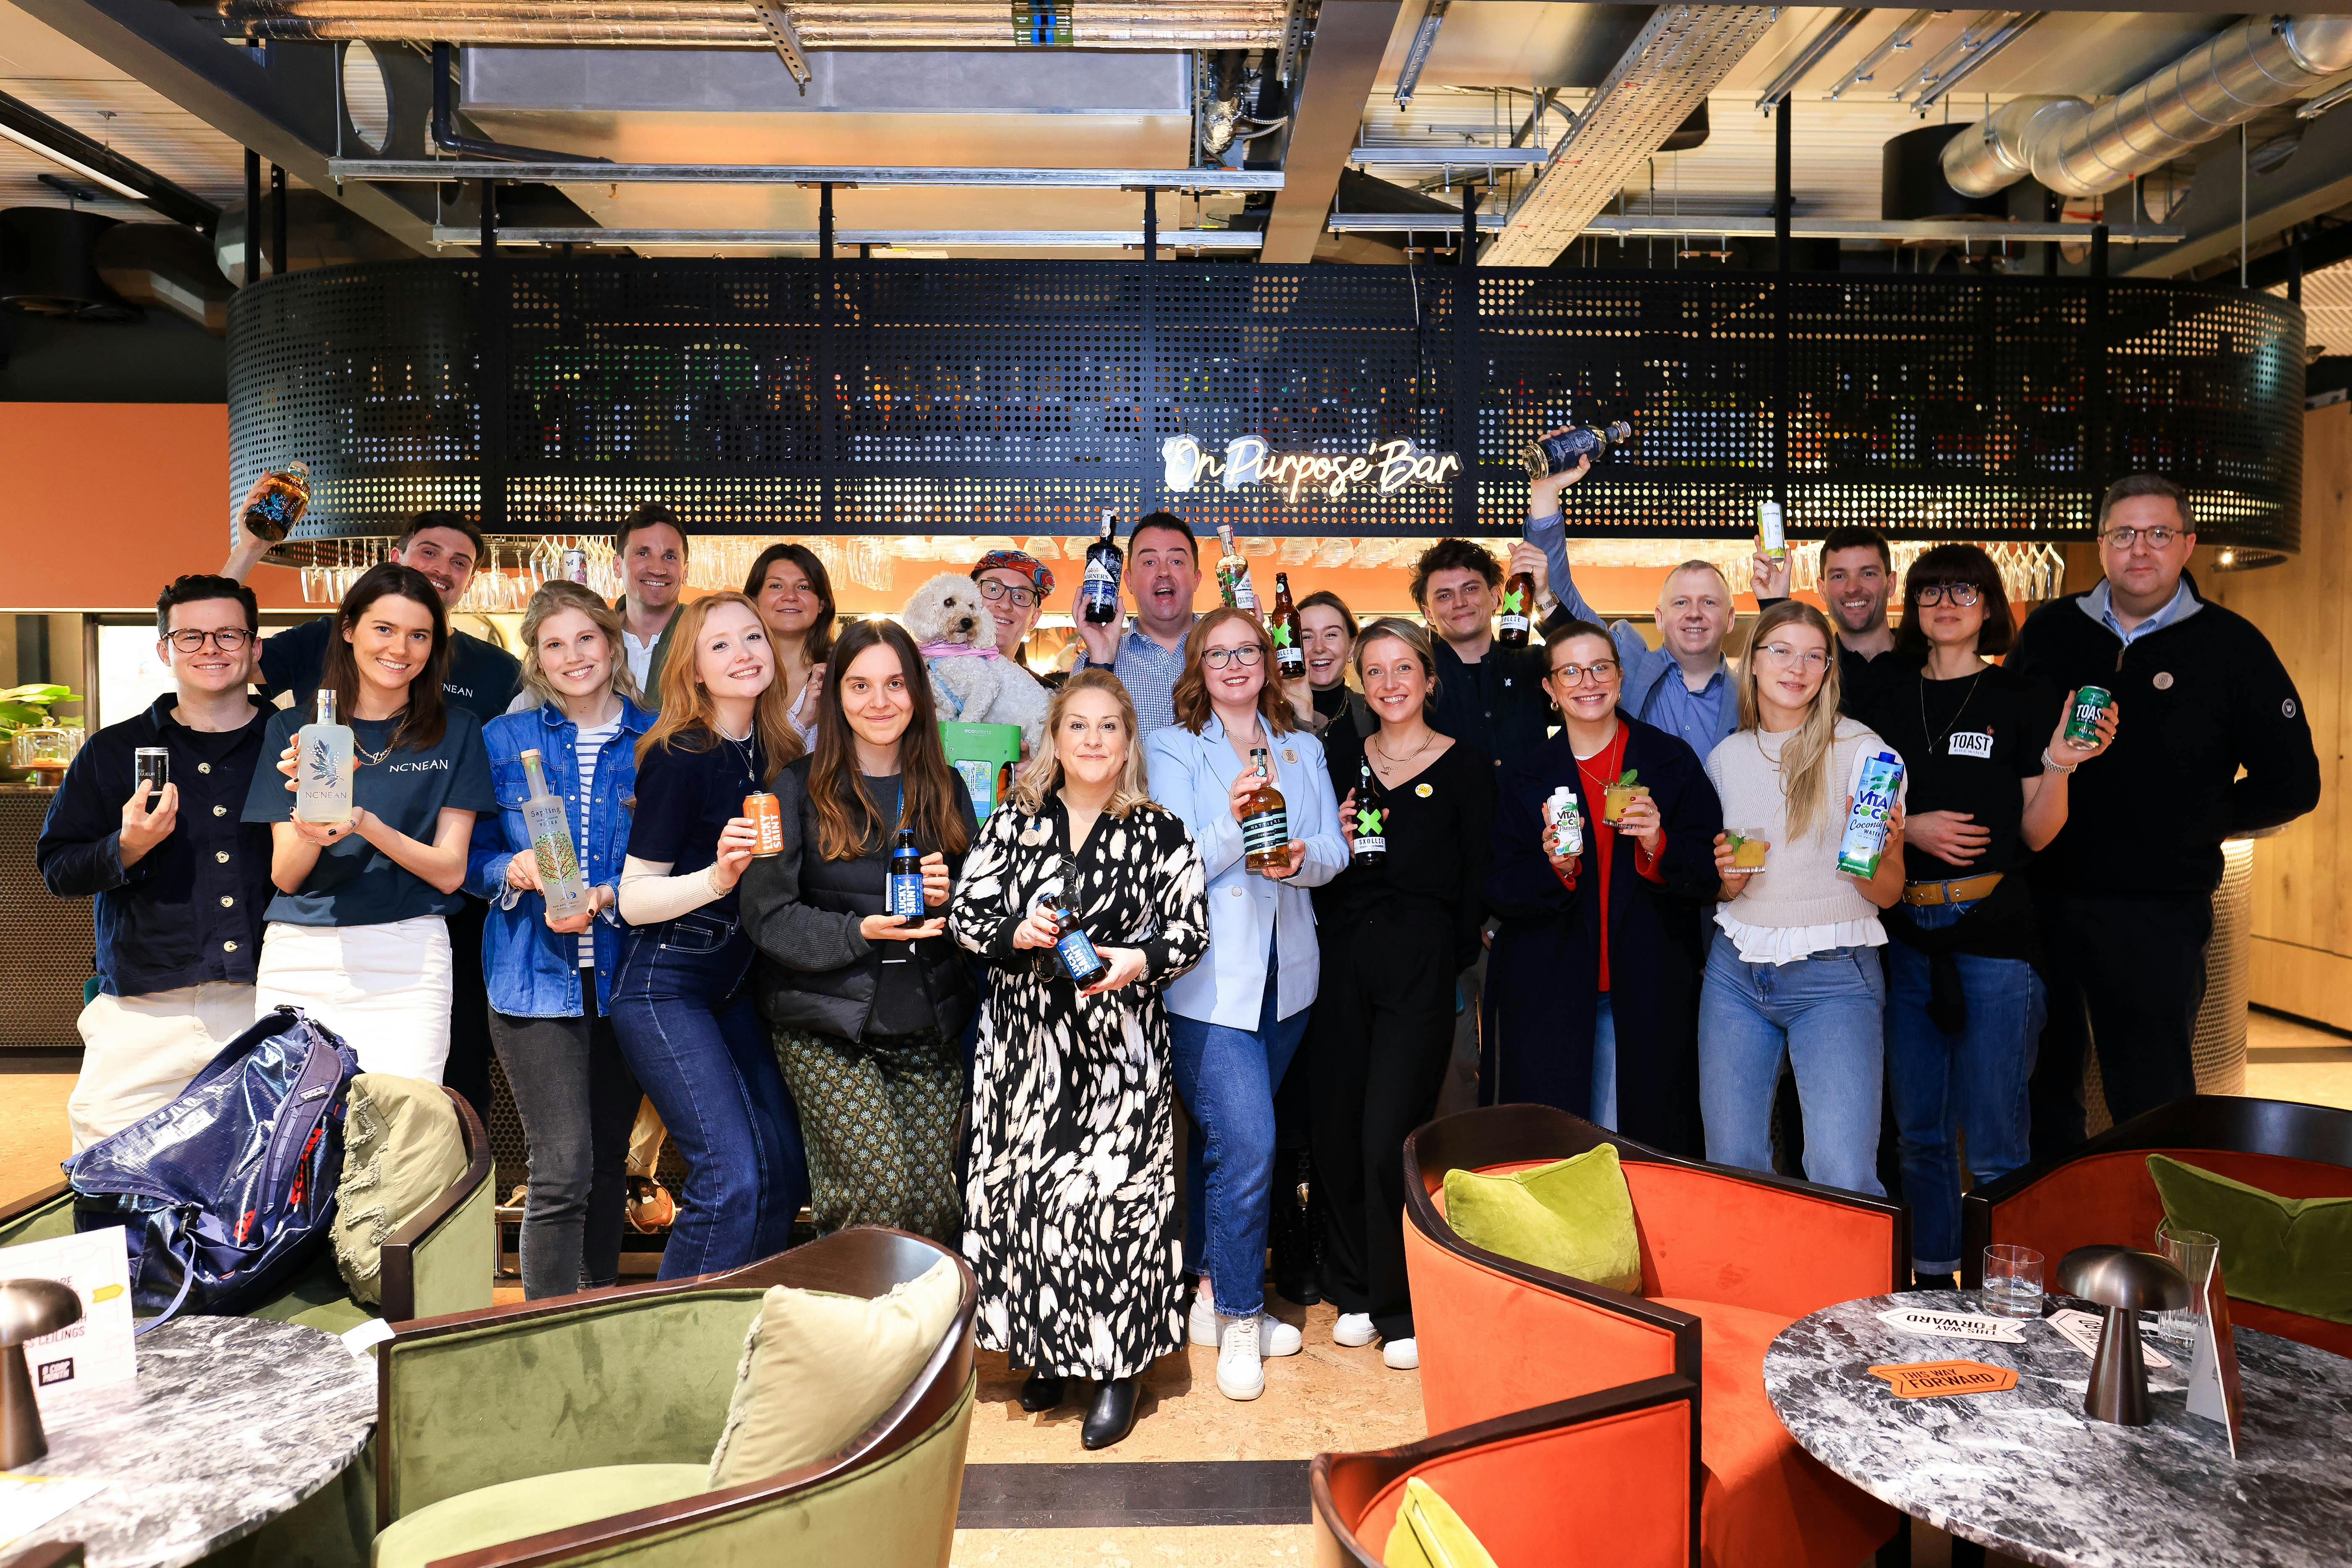 A group photo of B Corp company founders and staff to celebrate B Corp Month